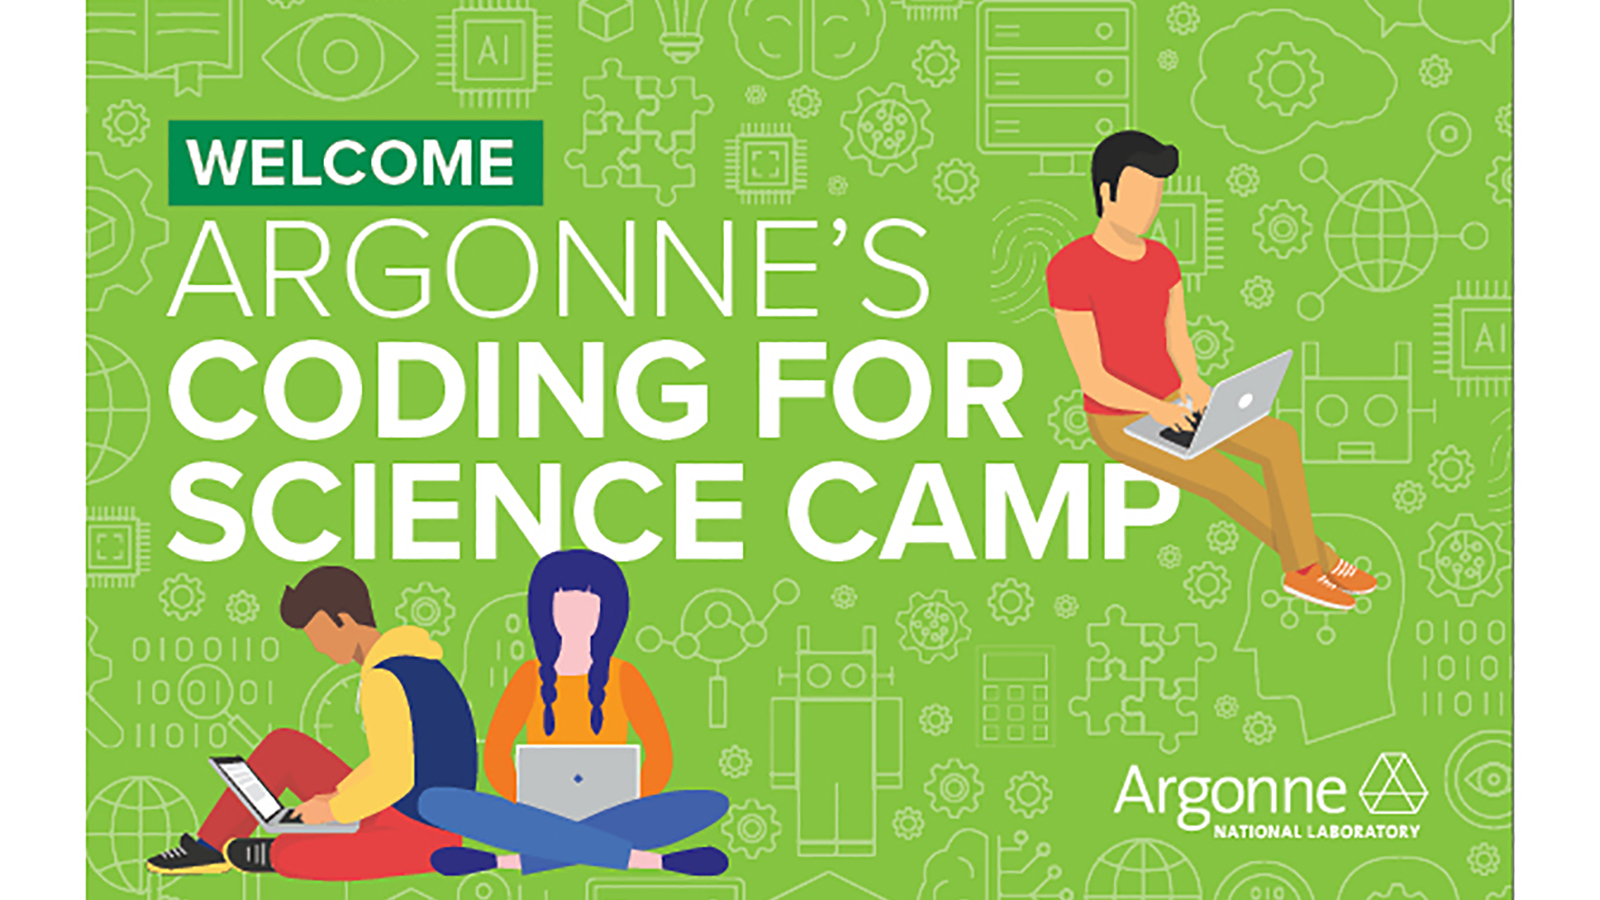 Learning Center instructors created many fun and colorful graphics to welcome students into the Virtual Coding for Science Camp experience. (Image by Argonne National Laboratory.)